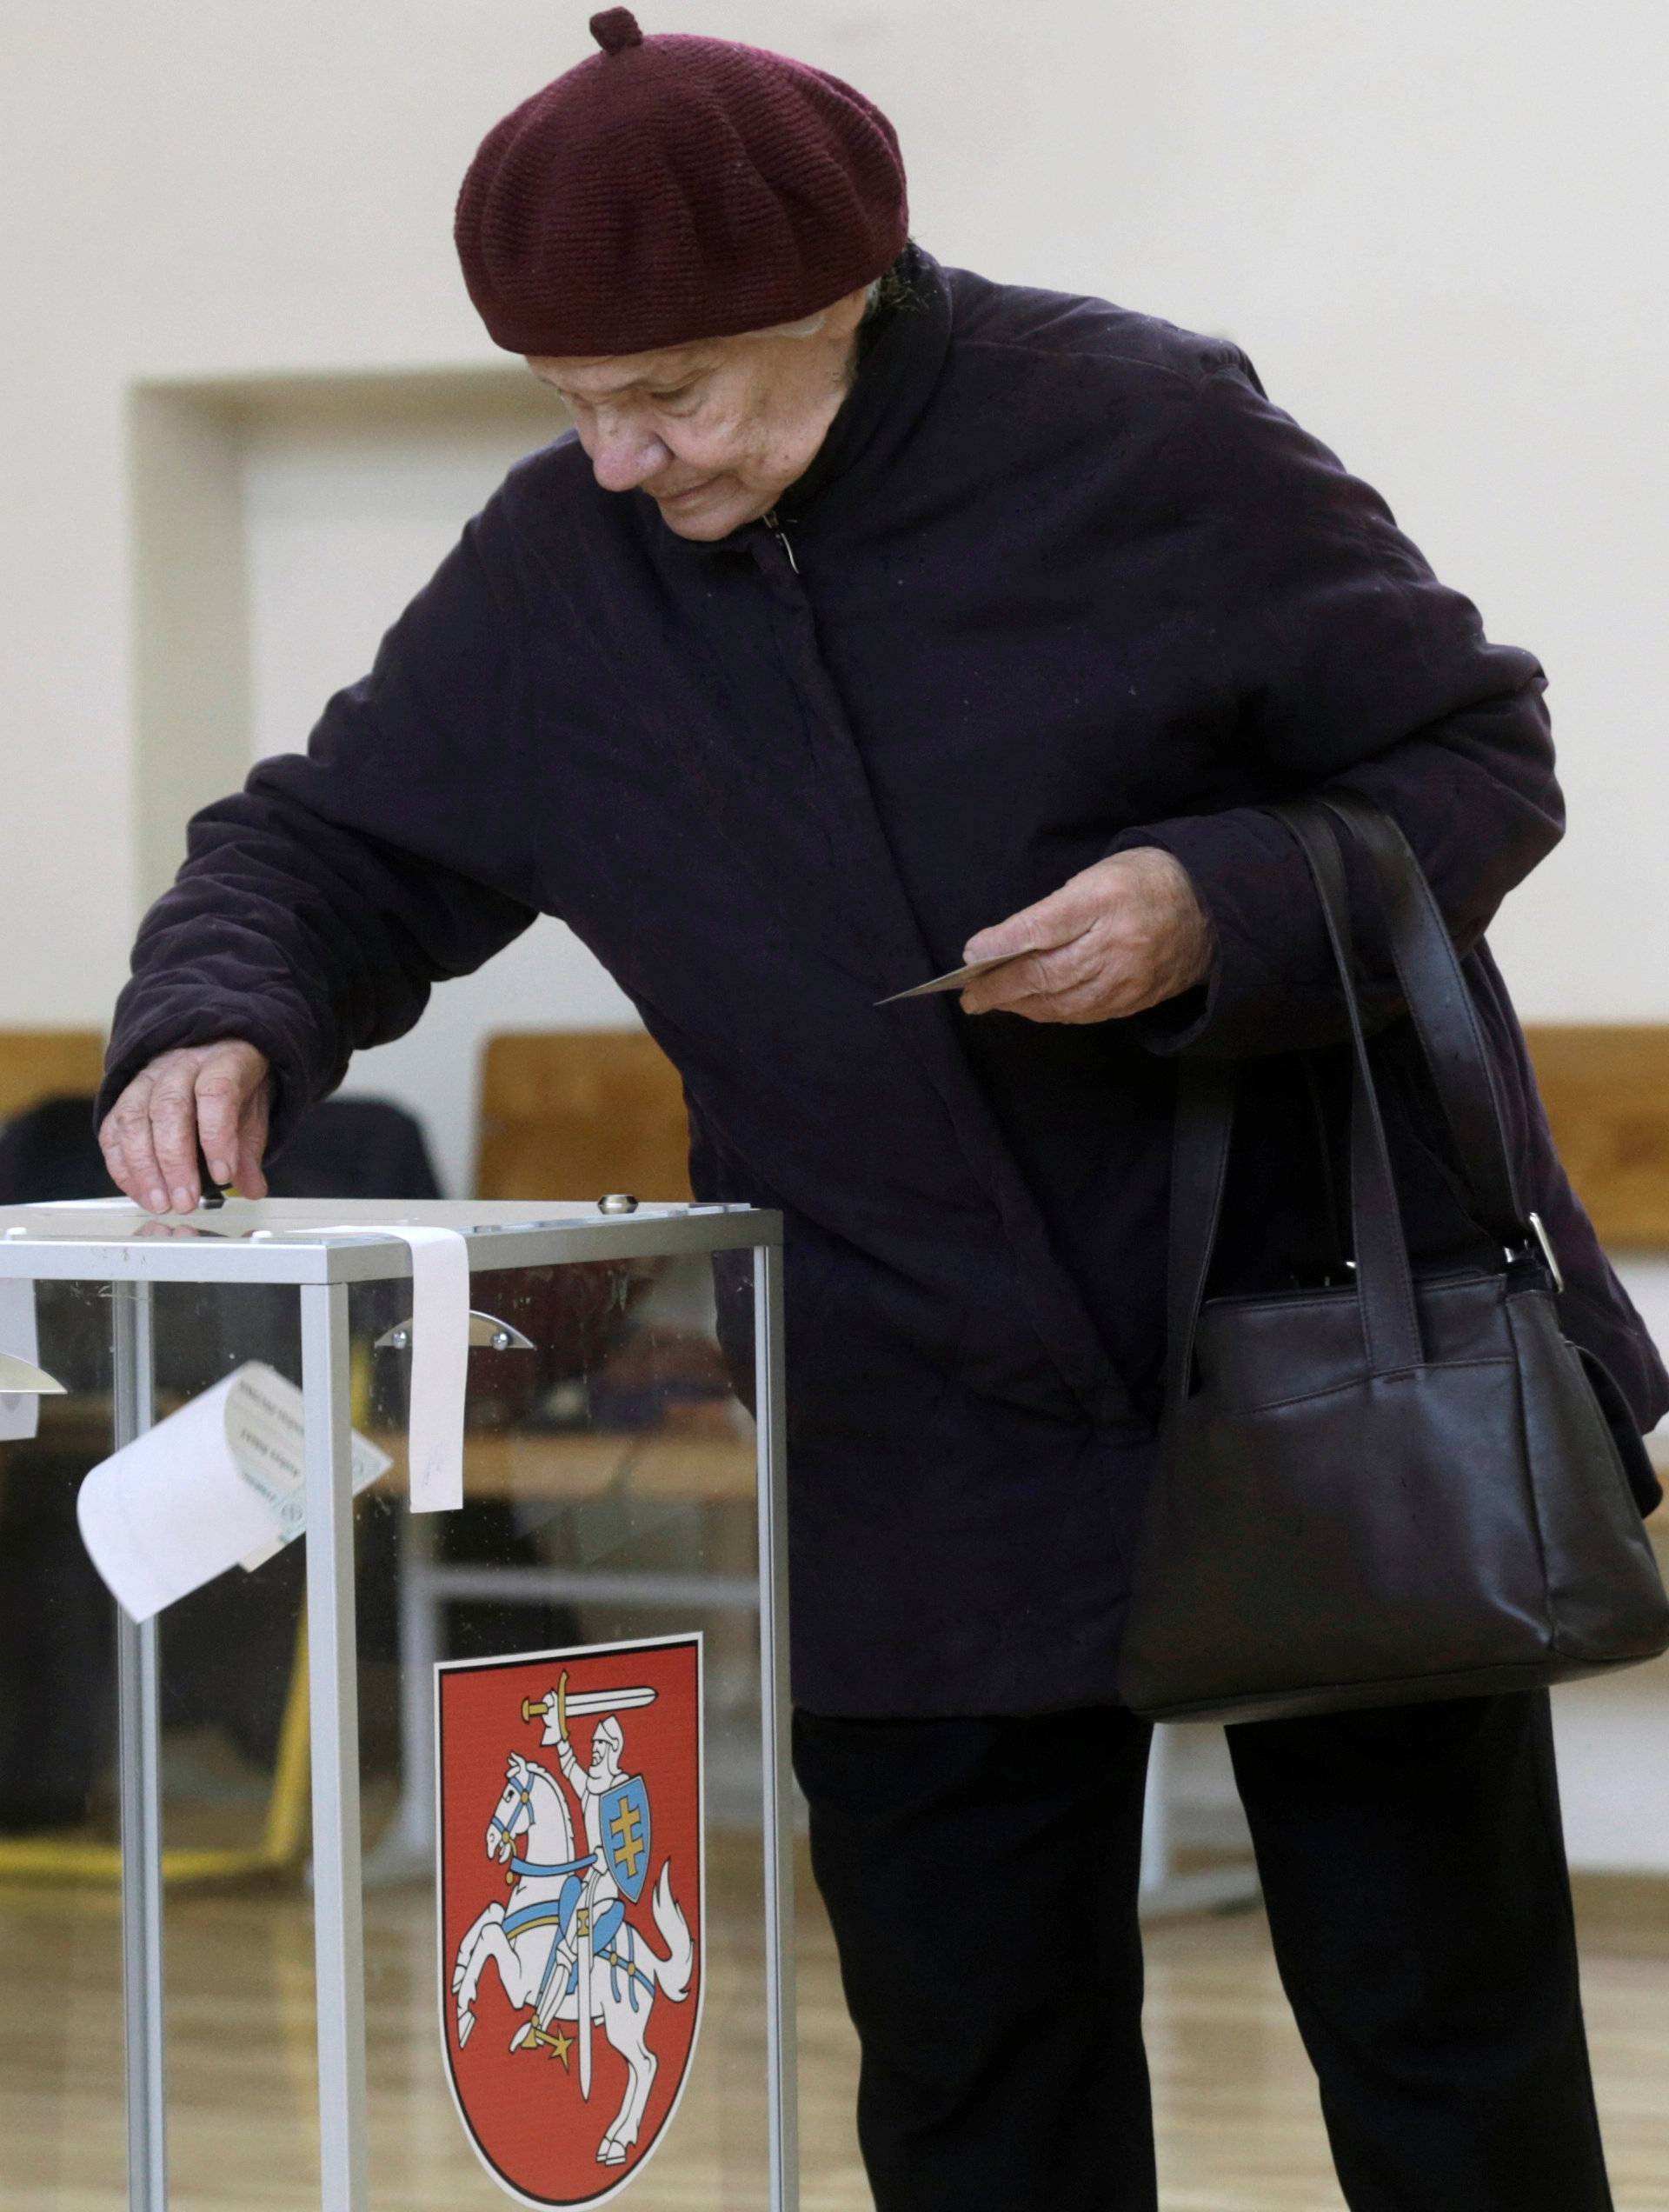 A woman casts her vote during a general election run-off in Birzai